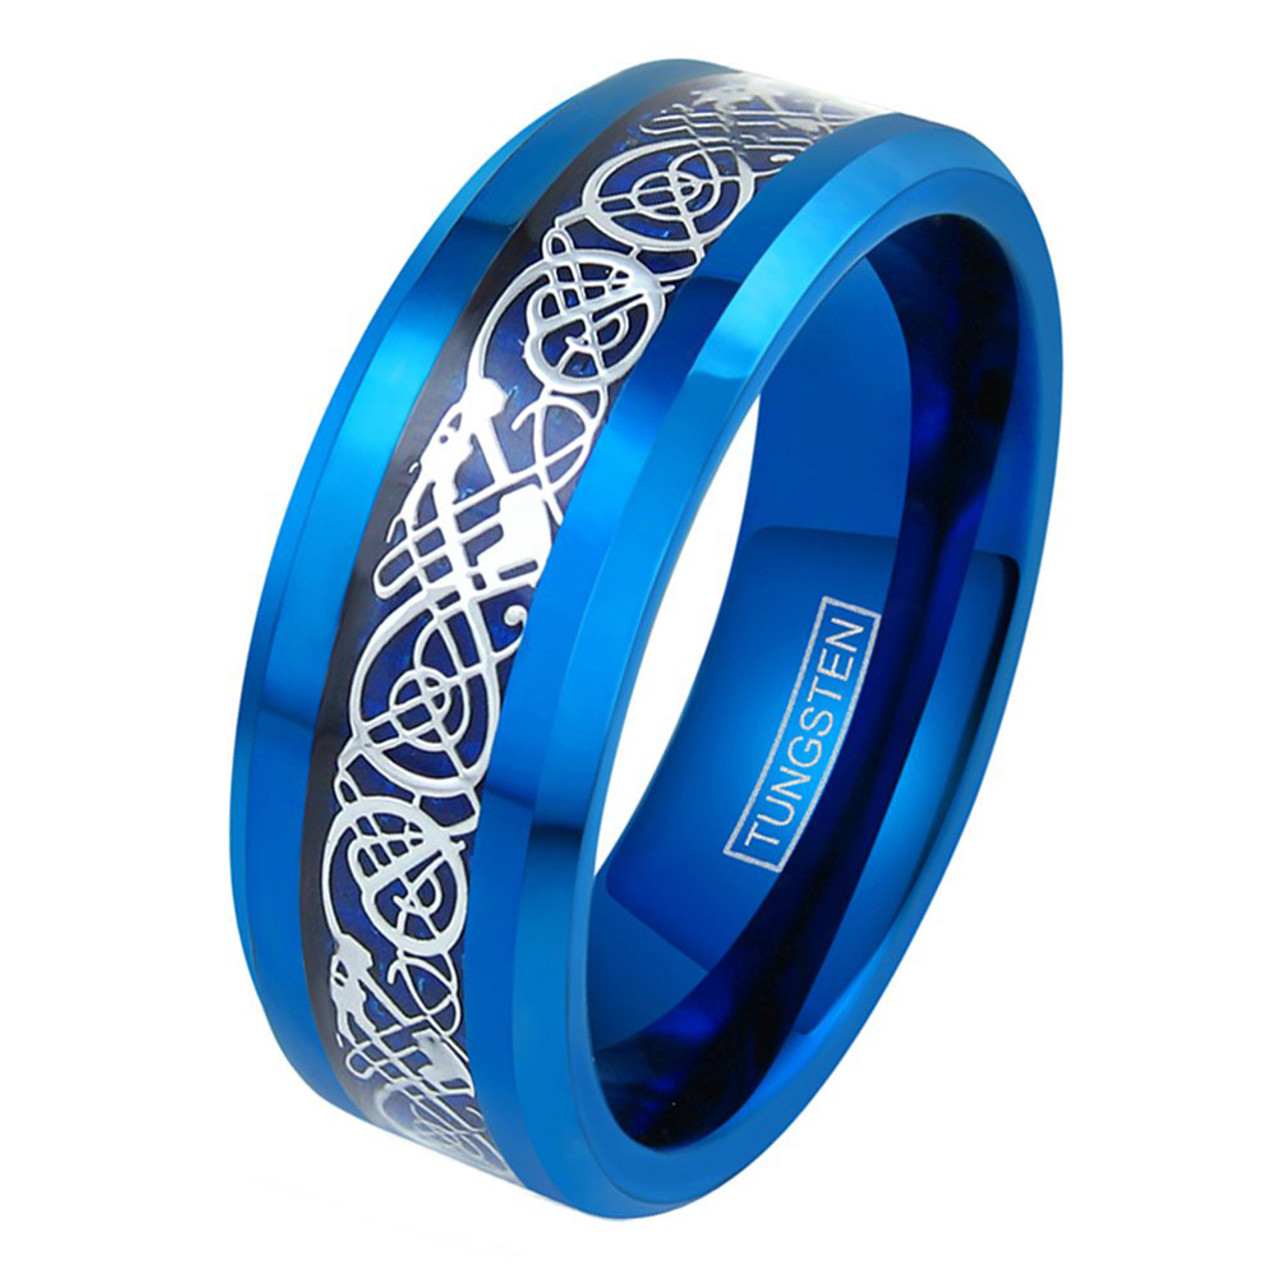 (8mm) Unisex or Men's Tungsten Carbide Wedding Ring Band. Blue Celtic Knot band with Blue and Silver Resin Inlay. Comfort Fit.